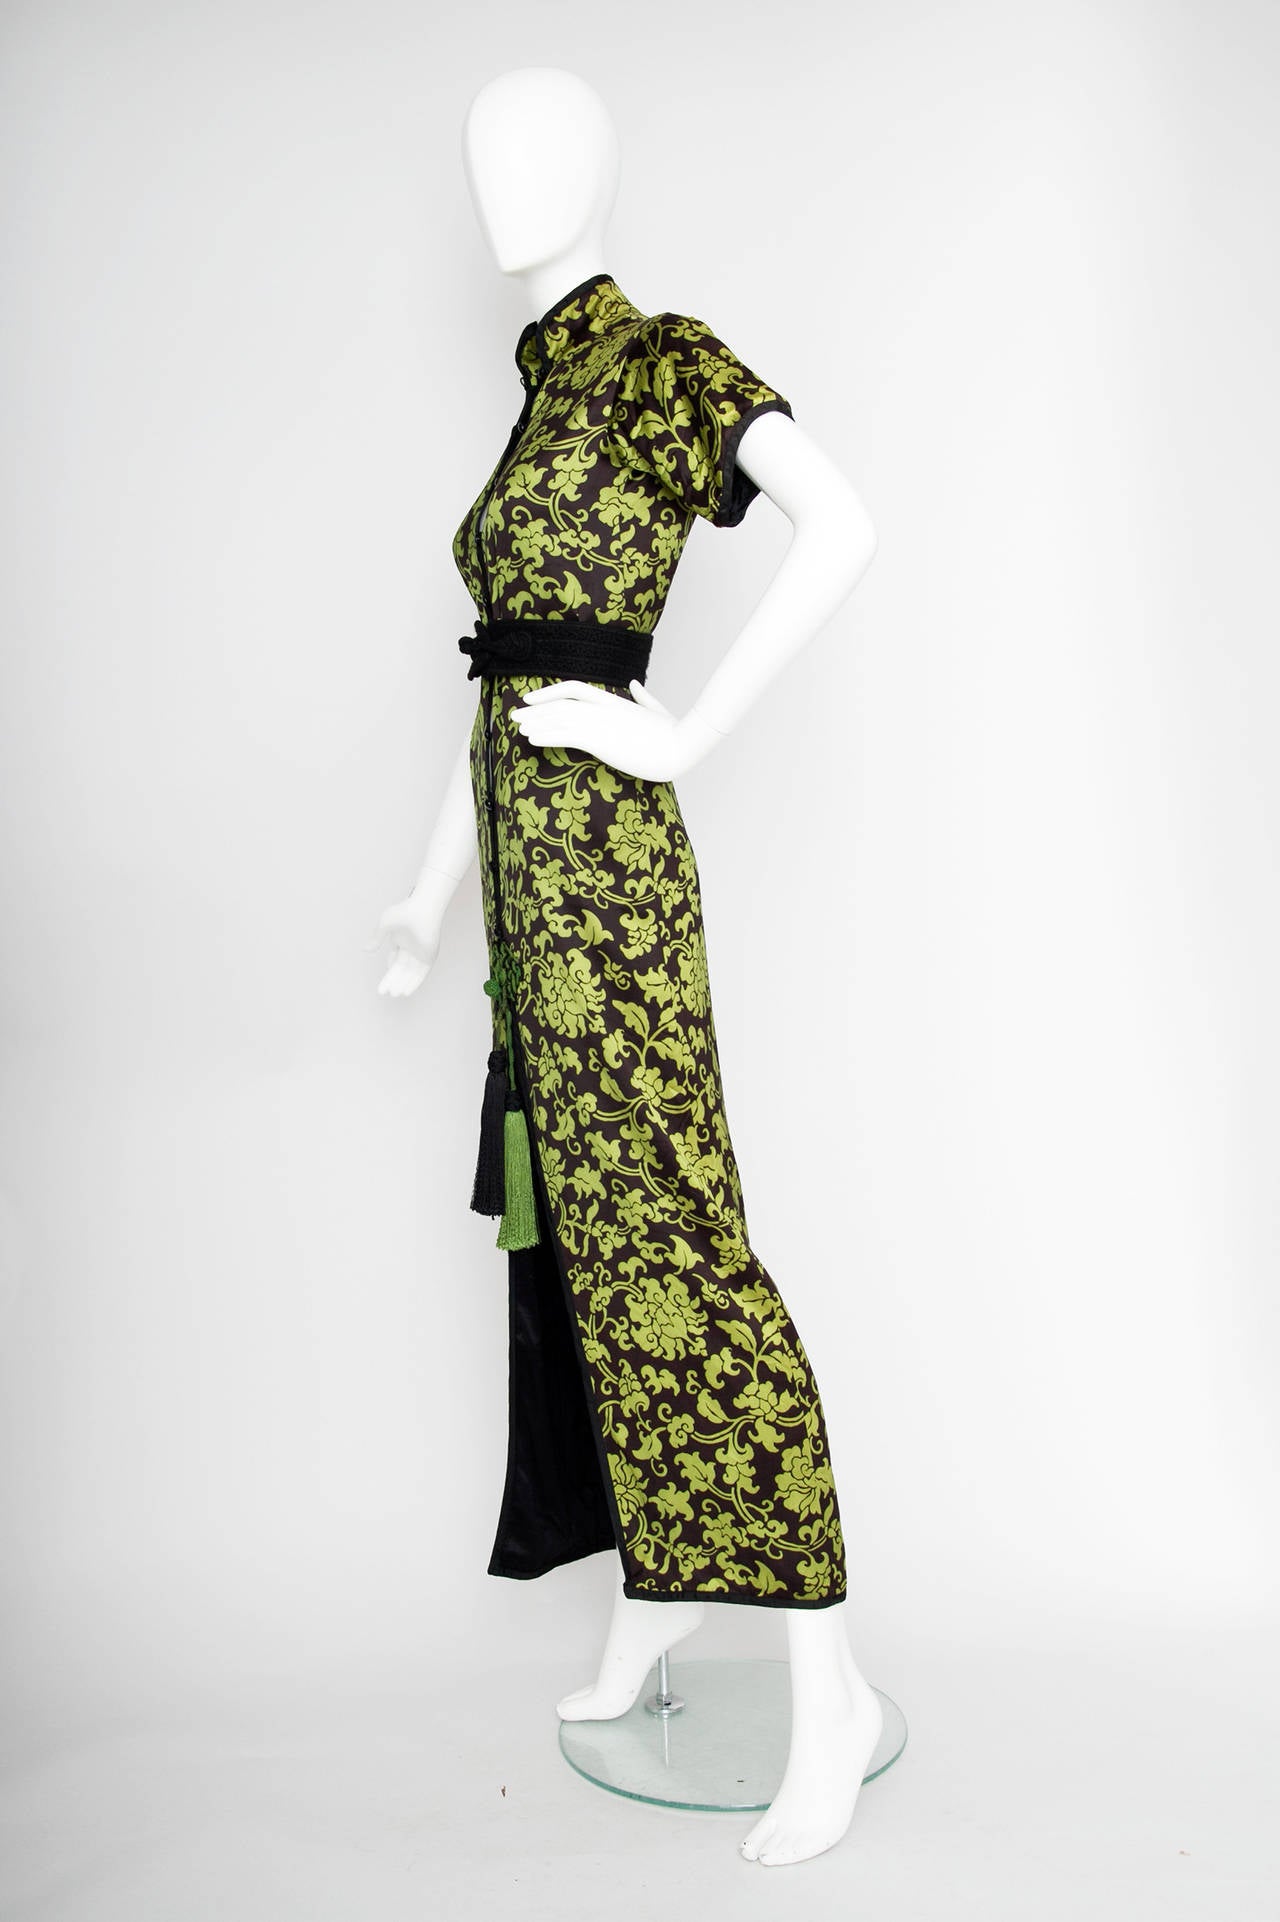 A stunning 1970s asian style Yves Saint Laurent floor length evening dress with an all over bright green floral print, short sleaves a high mandarin collar and black satin trimming. The dress furthermore features a green and black tassel detail that